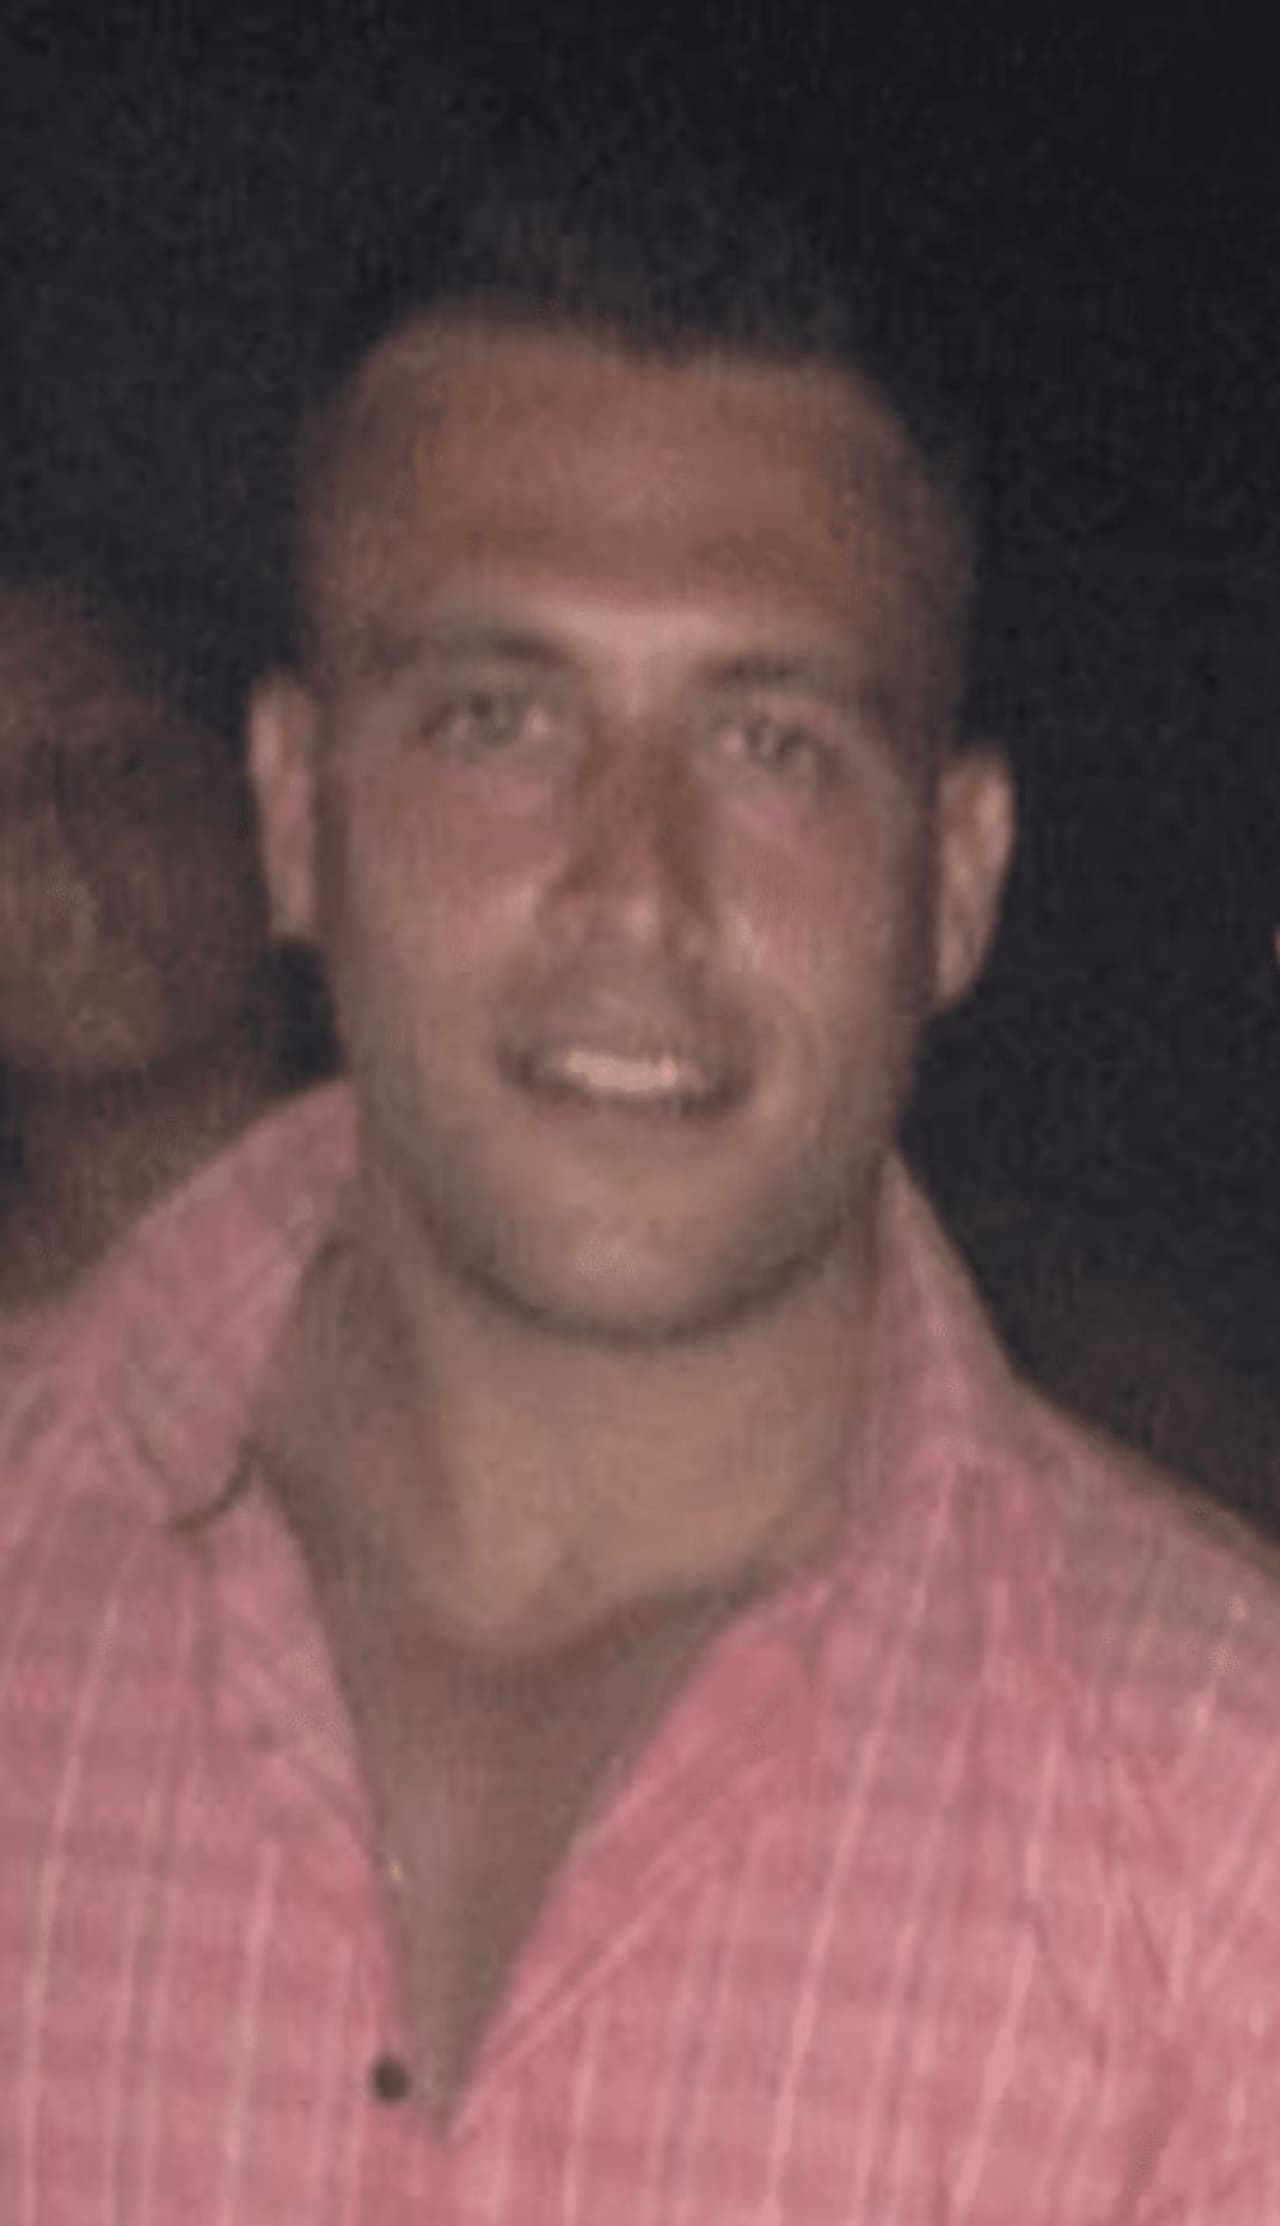 A suspect is being qustioned in the brutal murder of Joey Comunale of Stamford.